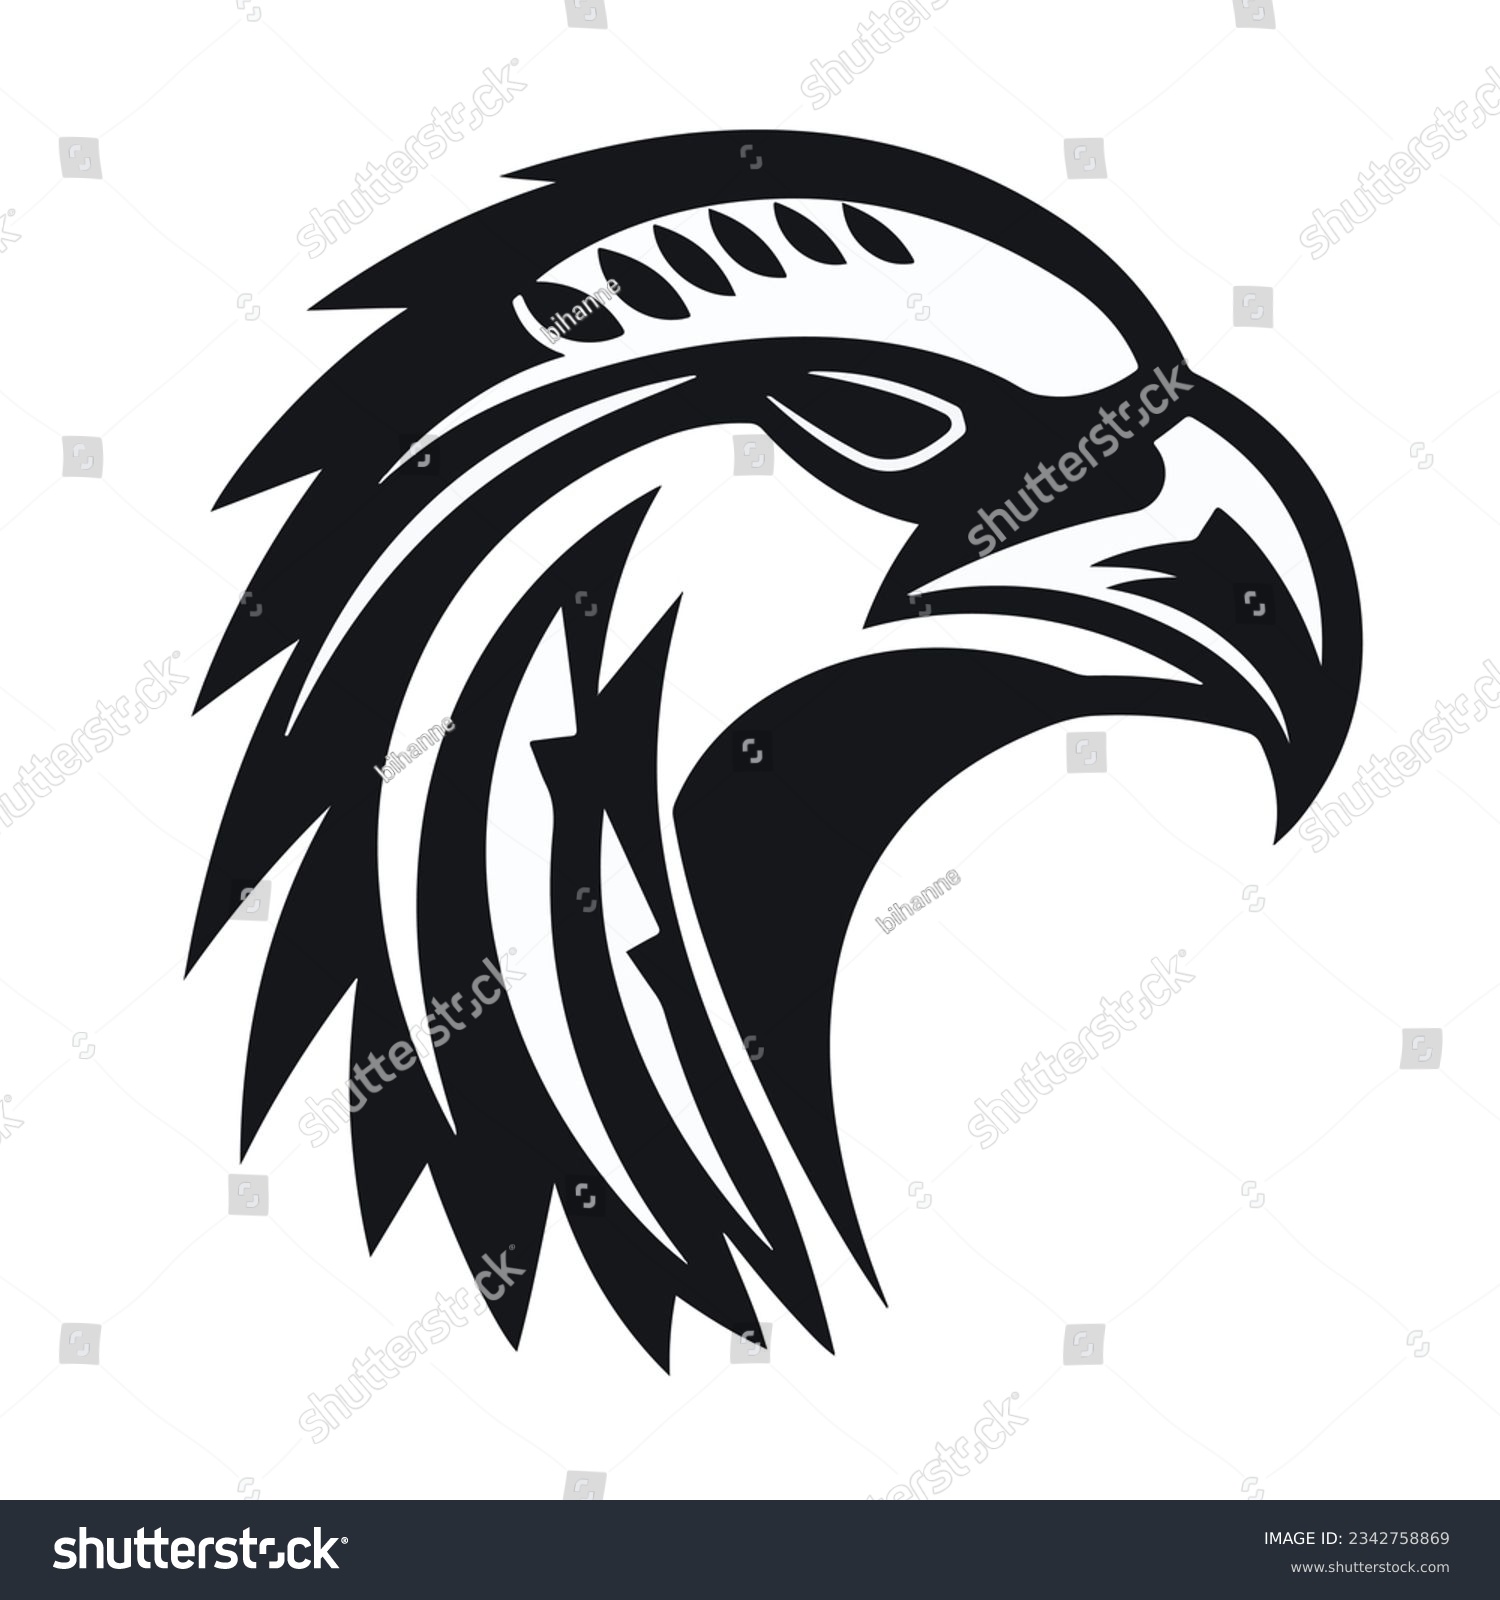 SVG of an icon svg of a head of an eagle no shadow black and white simple abstract shaman svg